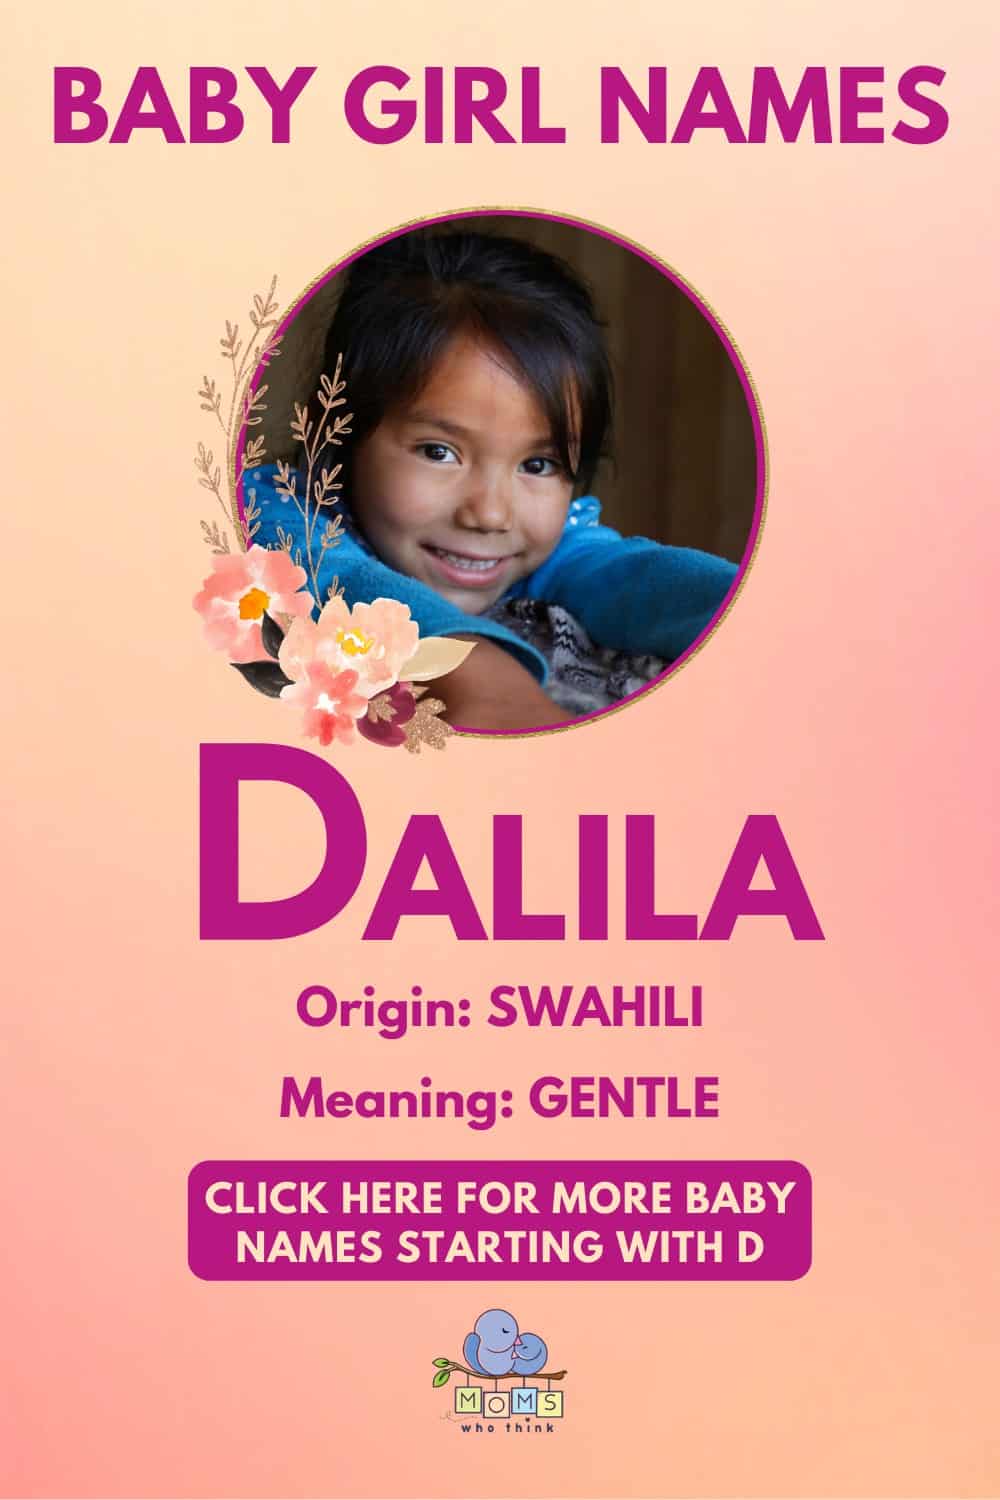 Baby girl name meanings - Dalila